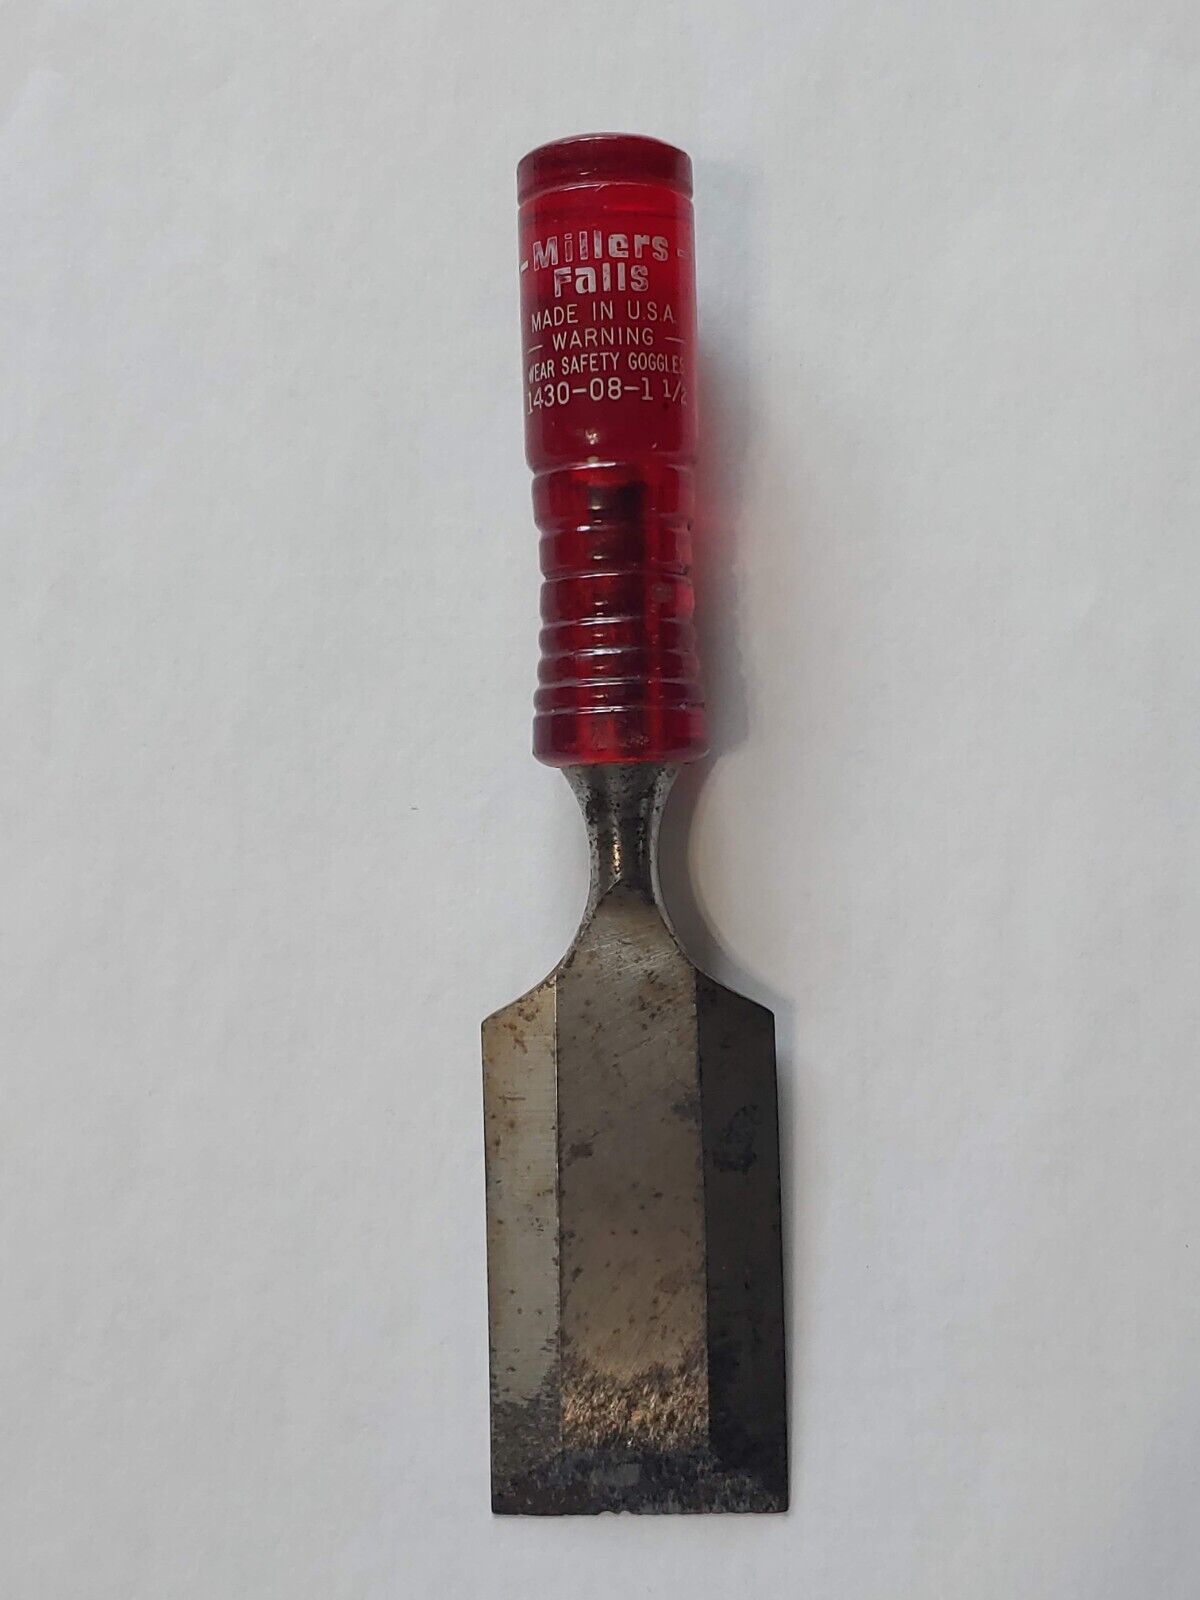 Vtg Millers Falls Chisel No. 1430-08-1 1/2  Red Handle Made in USA - 1 1/2 inch